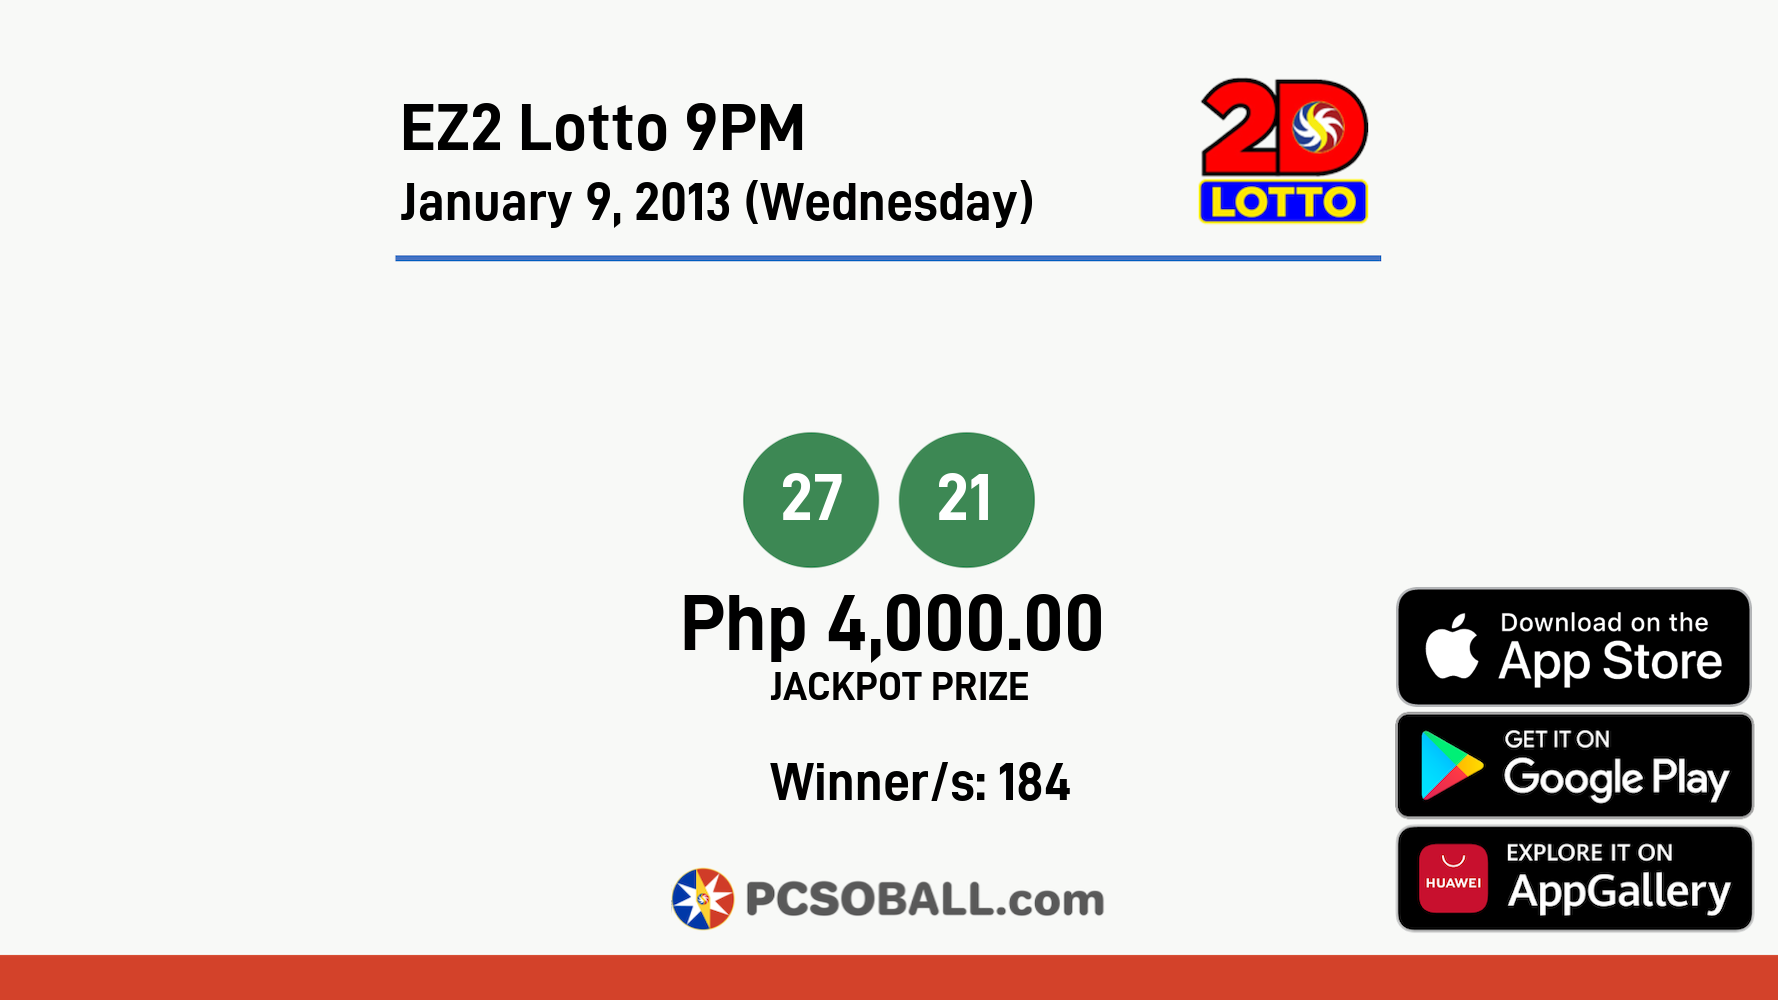 EZ2 Lotto 9PM January 9, 2013 (Wednesday) Result